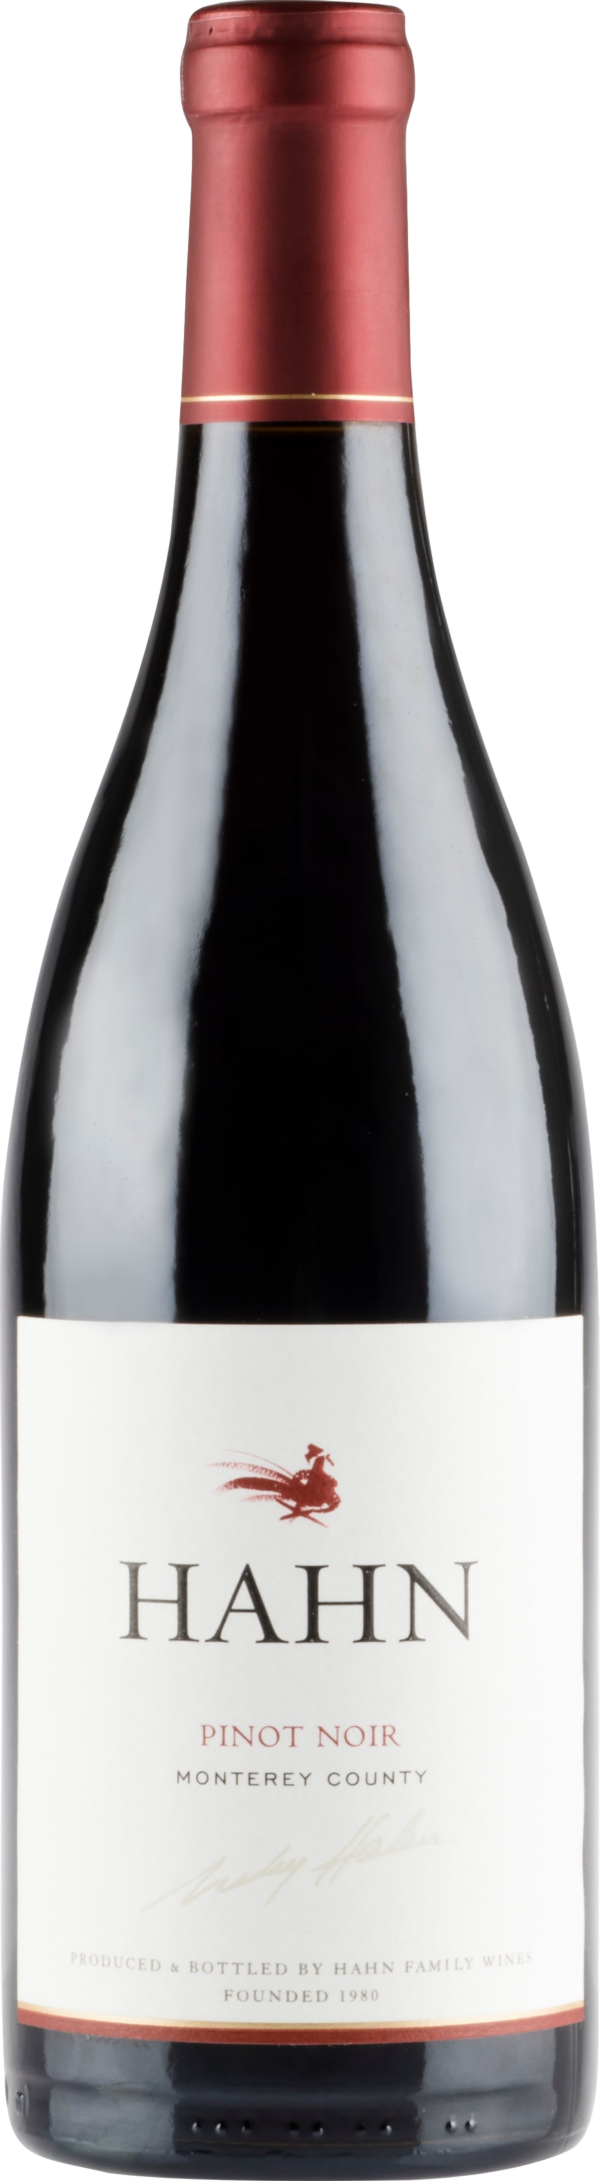 Product image of Hahn Pinot Noir 2020 from 8wines